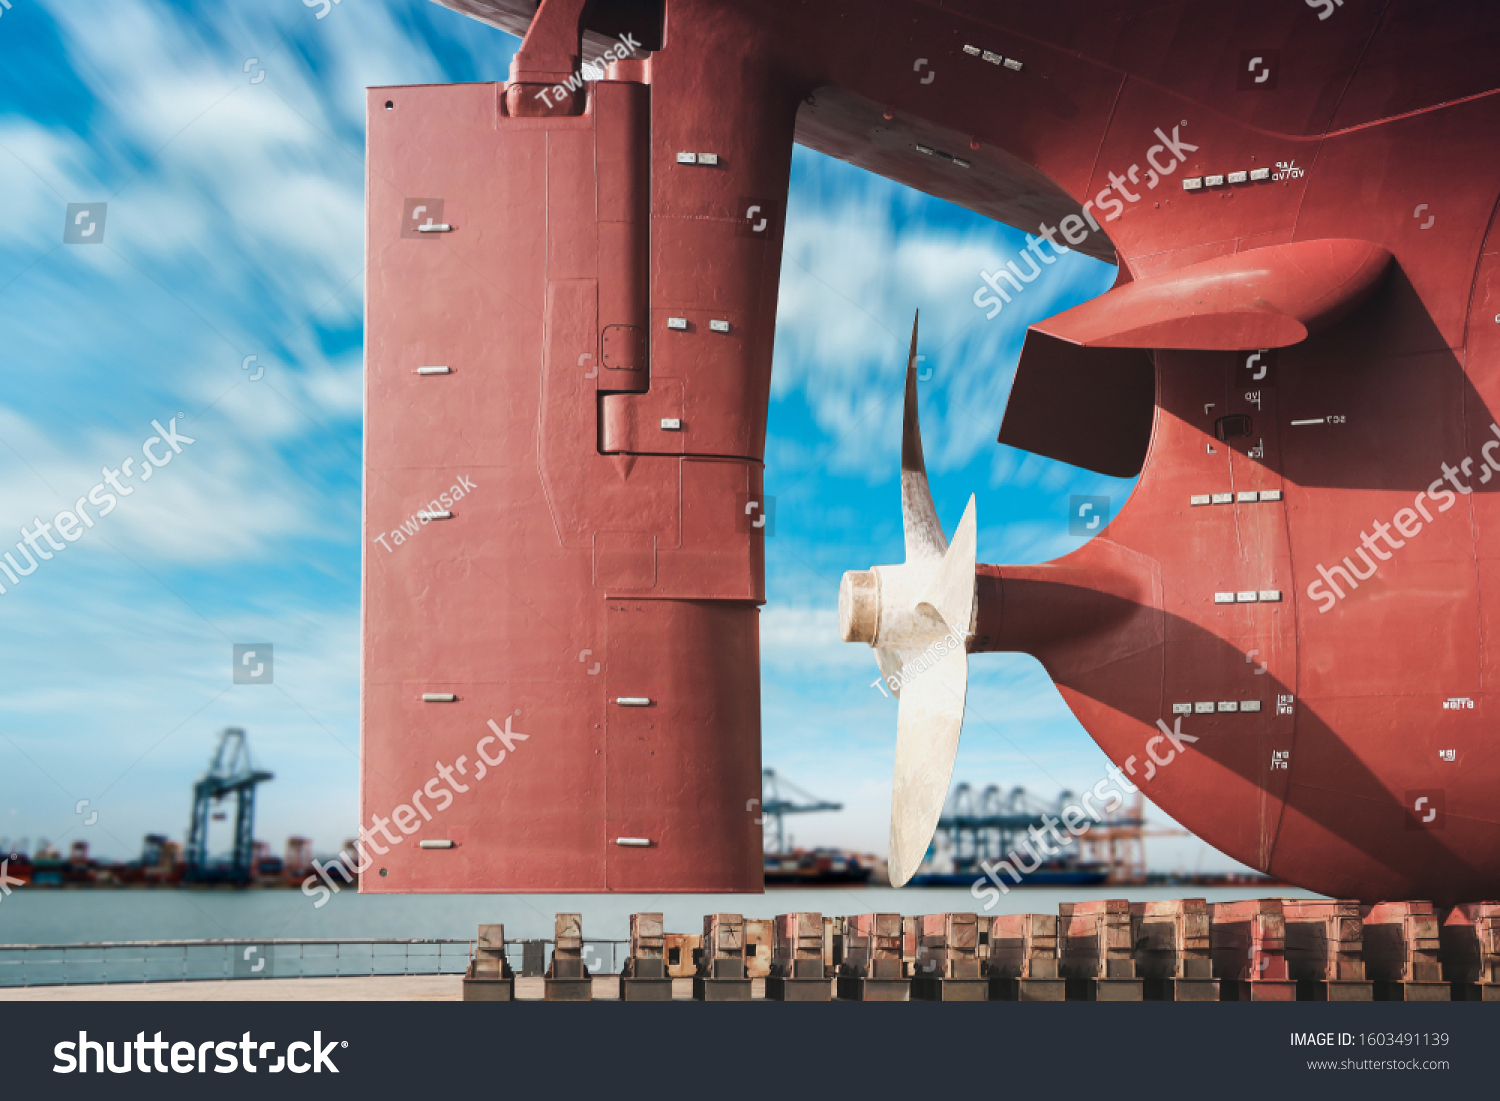 ship moored on sleeper At Stern ship Propeller with rudder under Reconstruction, Under the ship, Big ship under Repair on floating dry dock in shipyard #1603491139